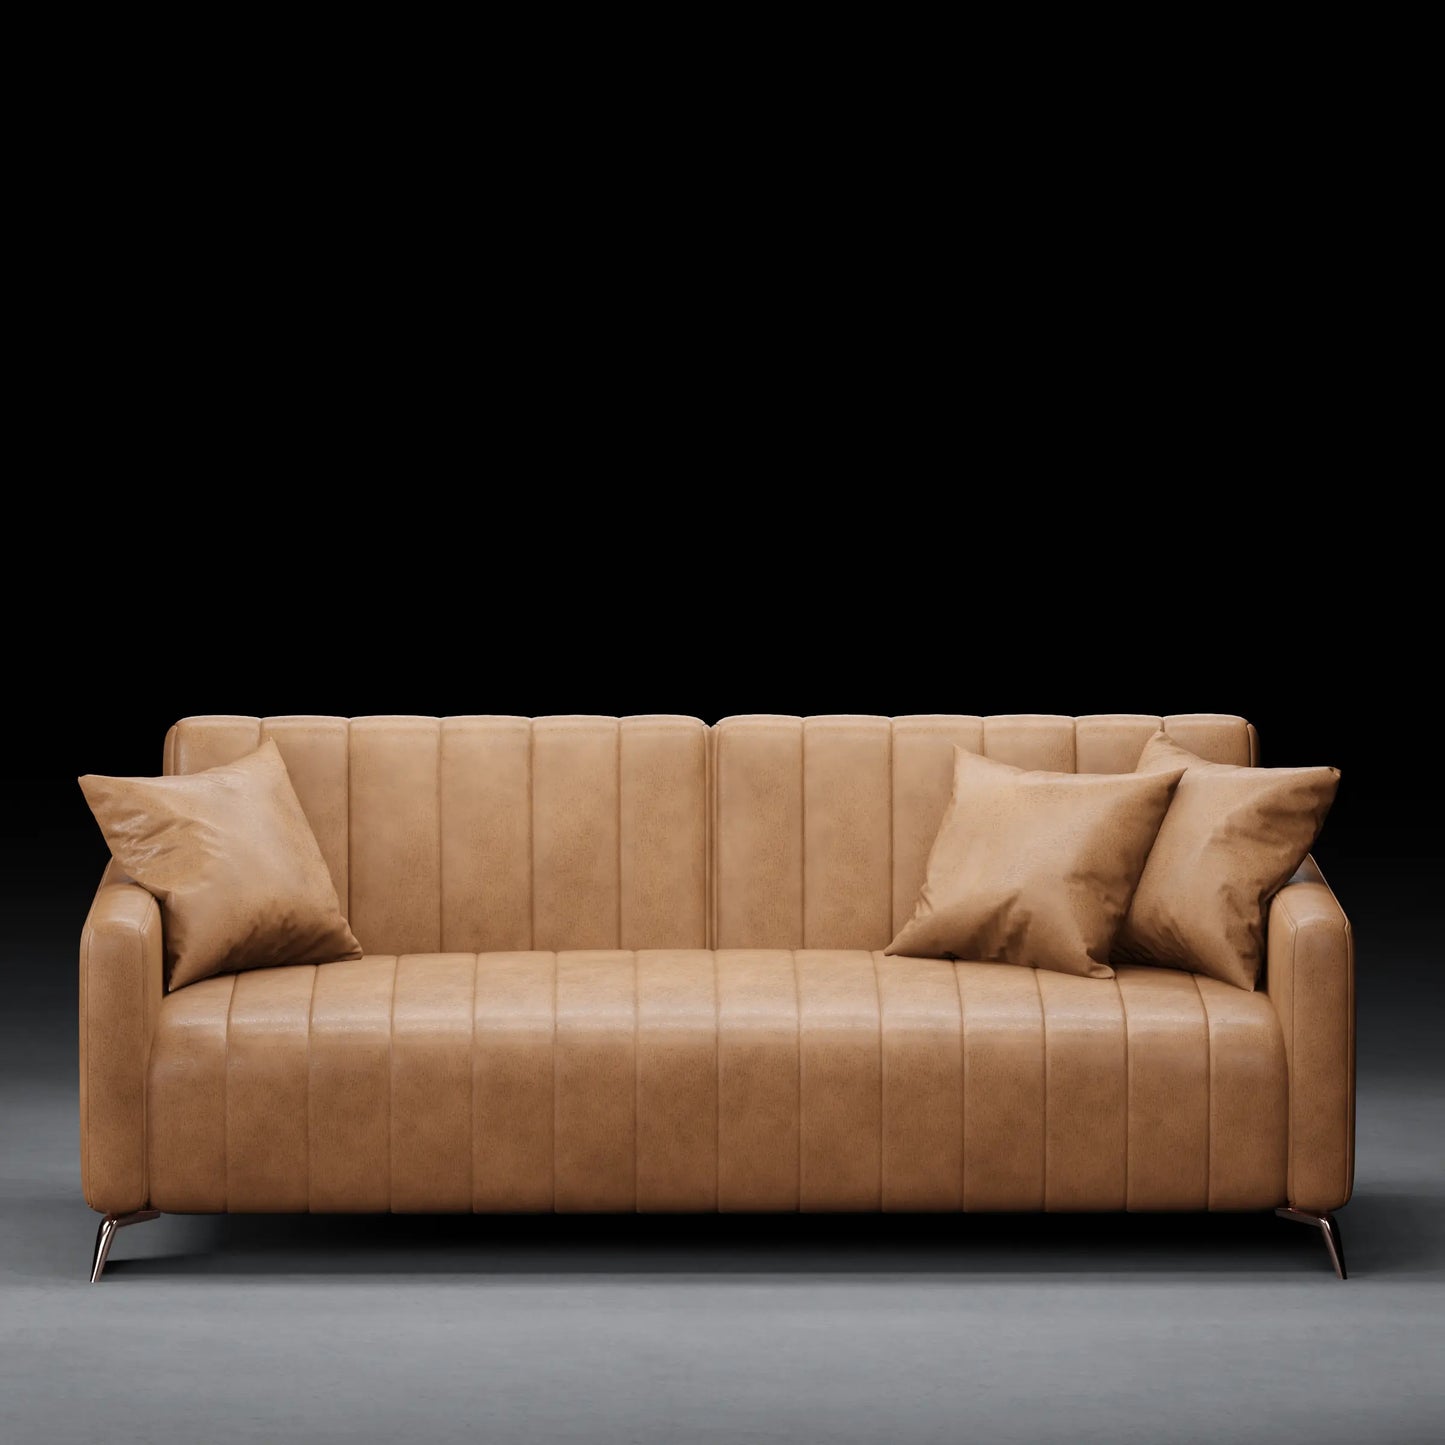 Berry  - 3 Seater Couch in Leather Finish | Tan Color